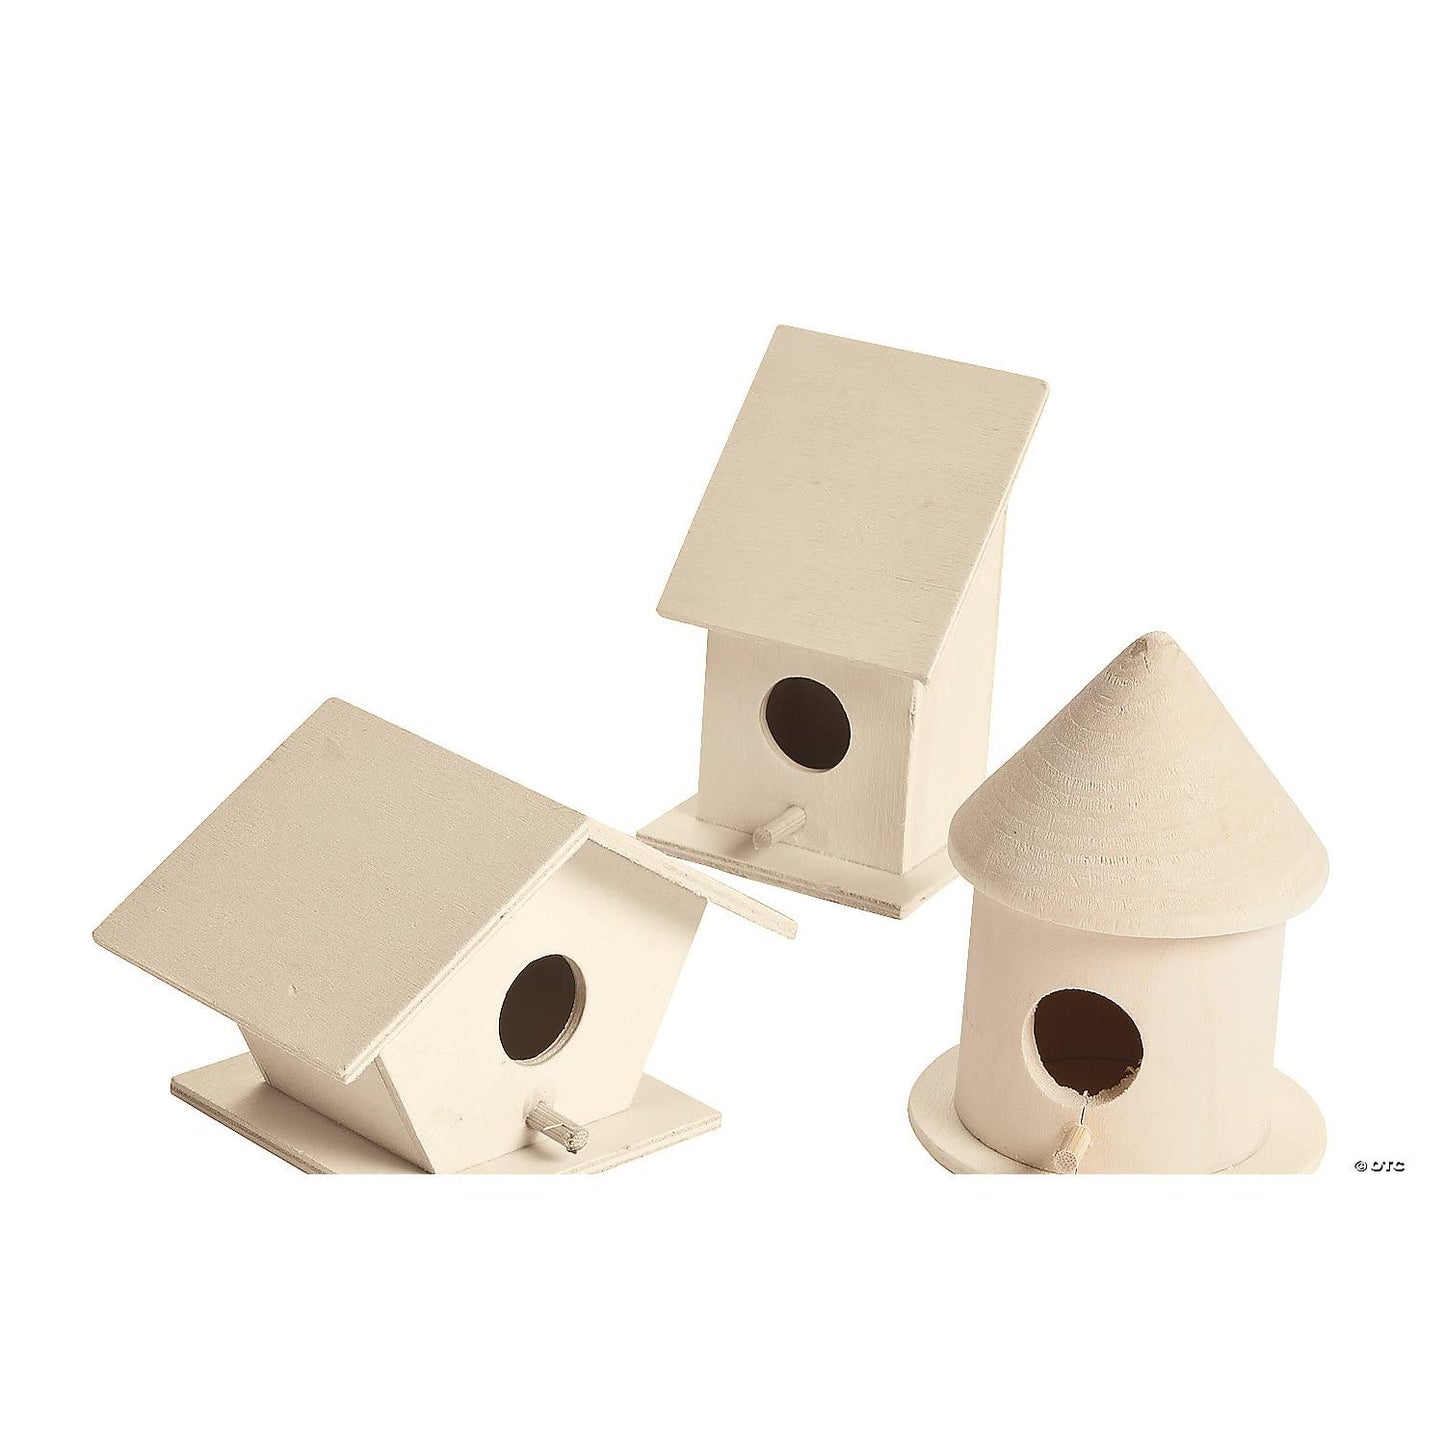 DIY Wood Nesting Birdhouses - Set of 6 - Crafts for Kids and Fun Home Activities